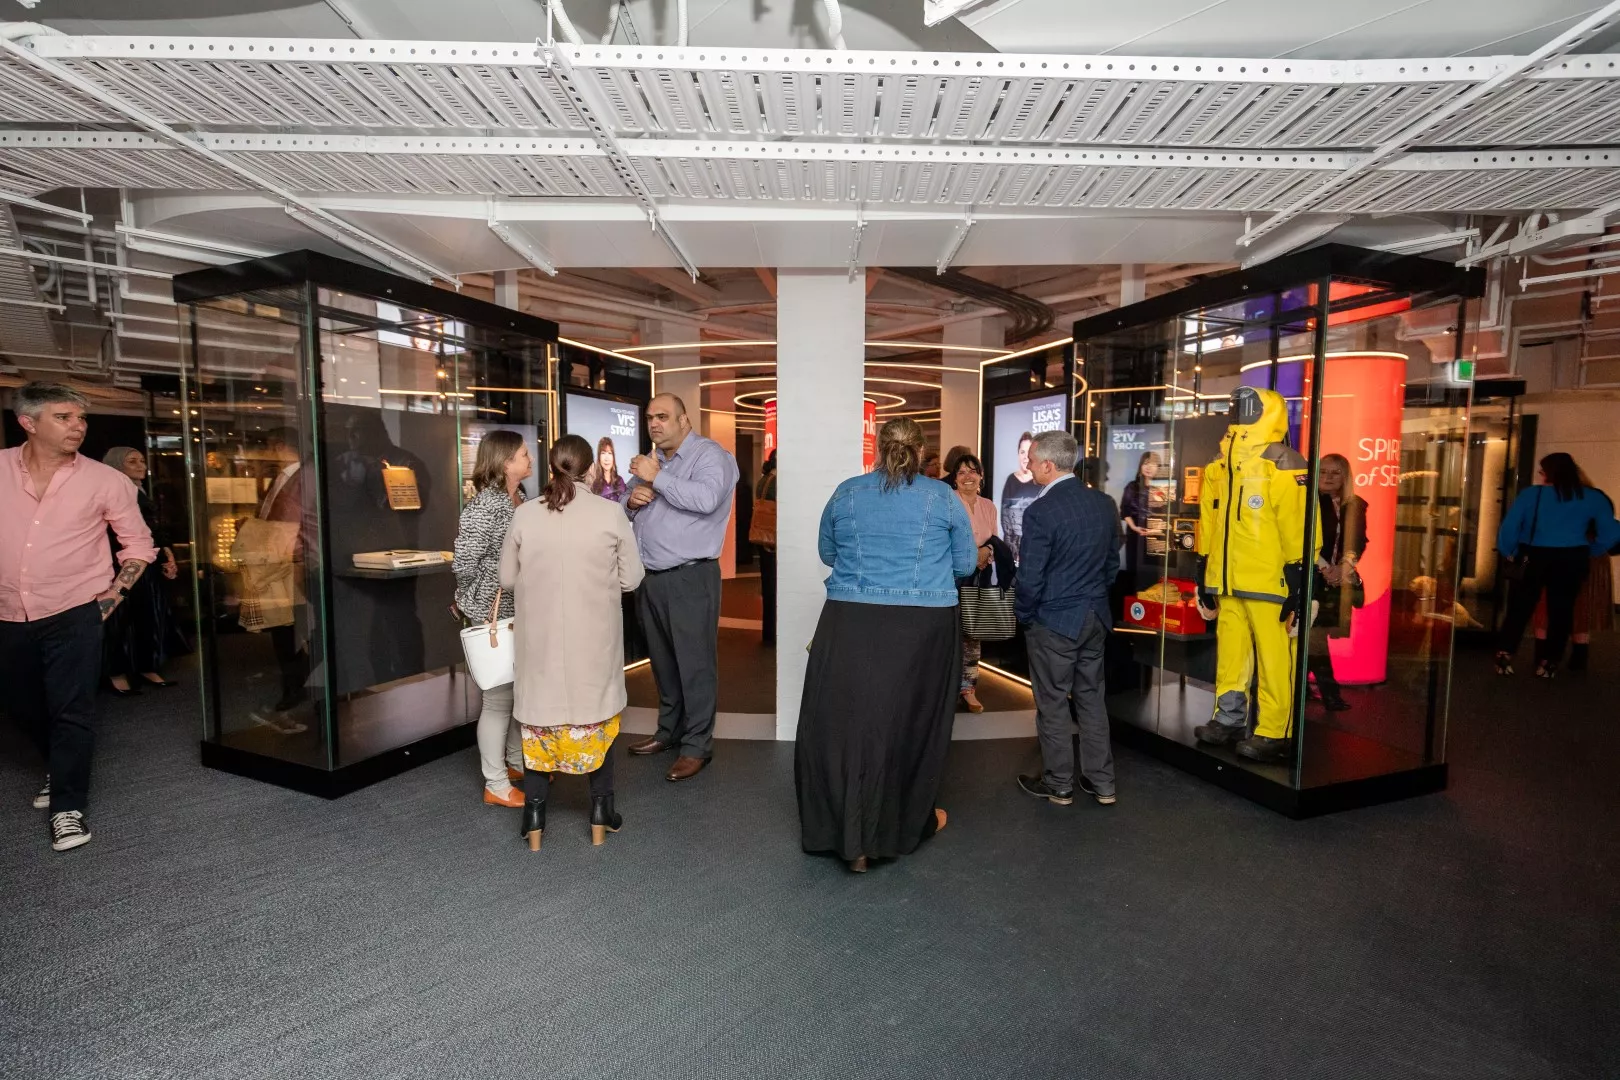 People mill around talking to each other and looking into glass displays in a museum exhibition. One features a bright yellow suit.